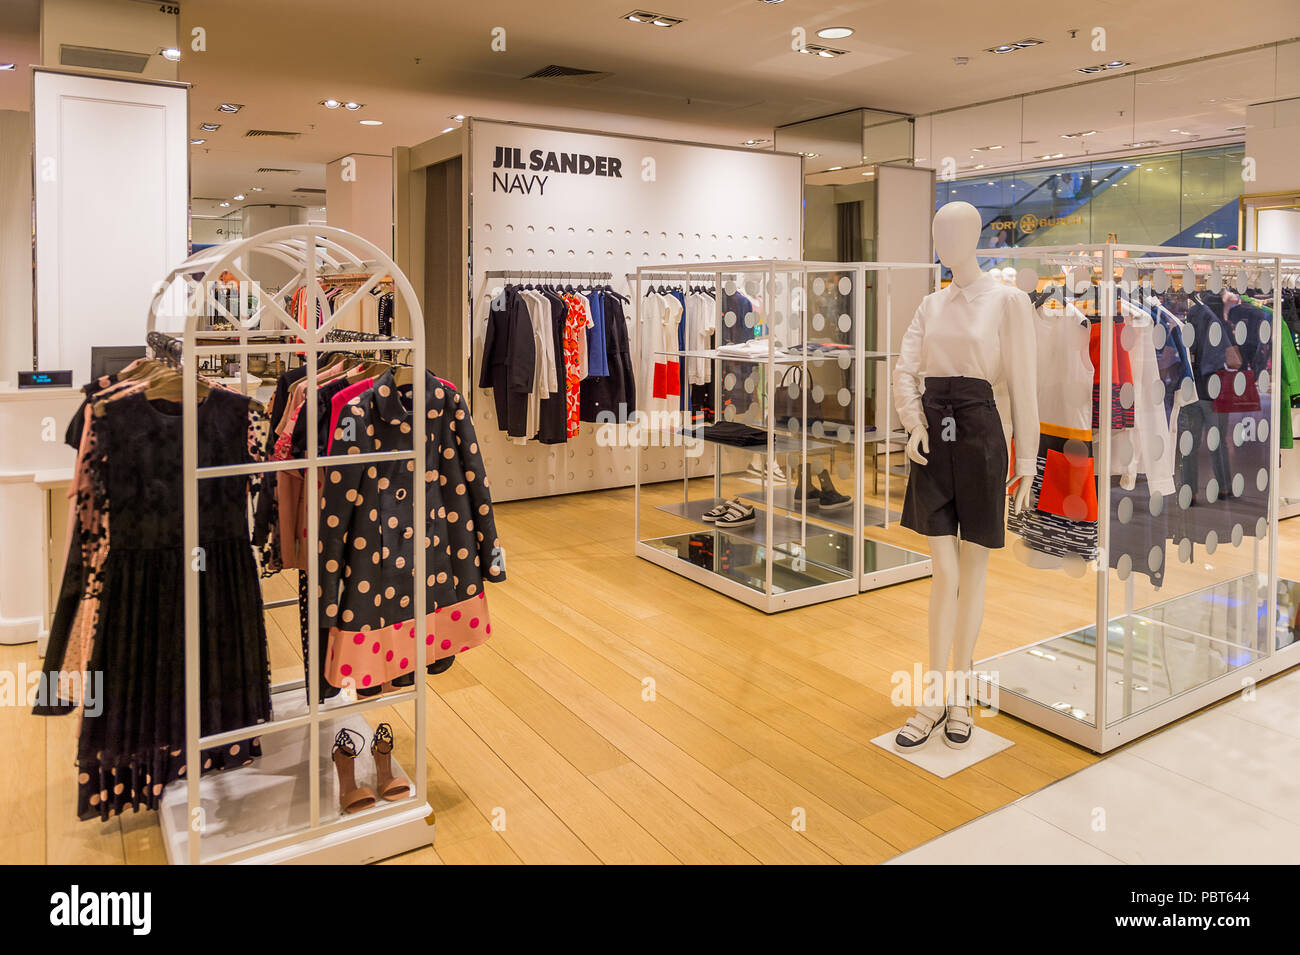 Jil sander store hi-res stock photography and images - Alamy